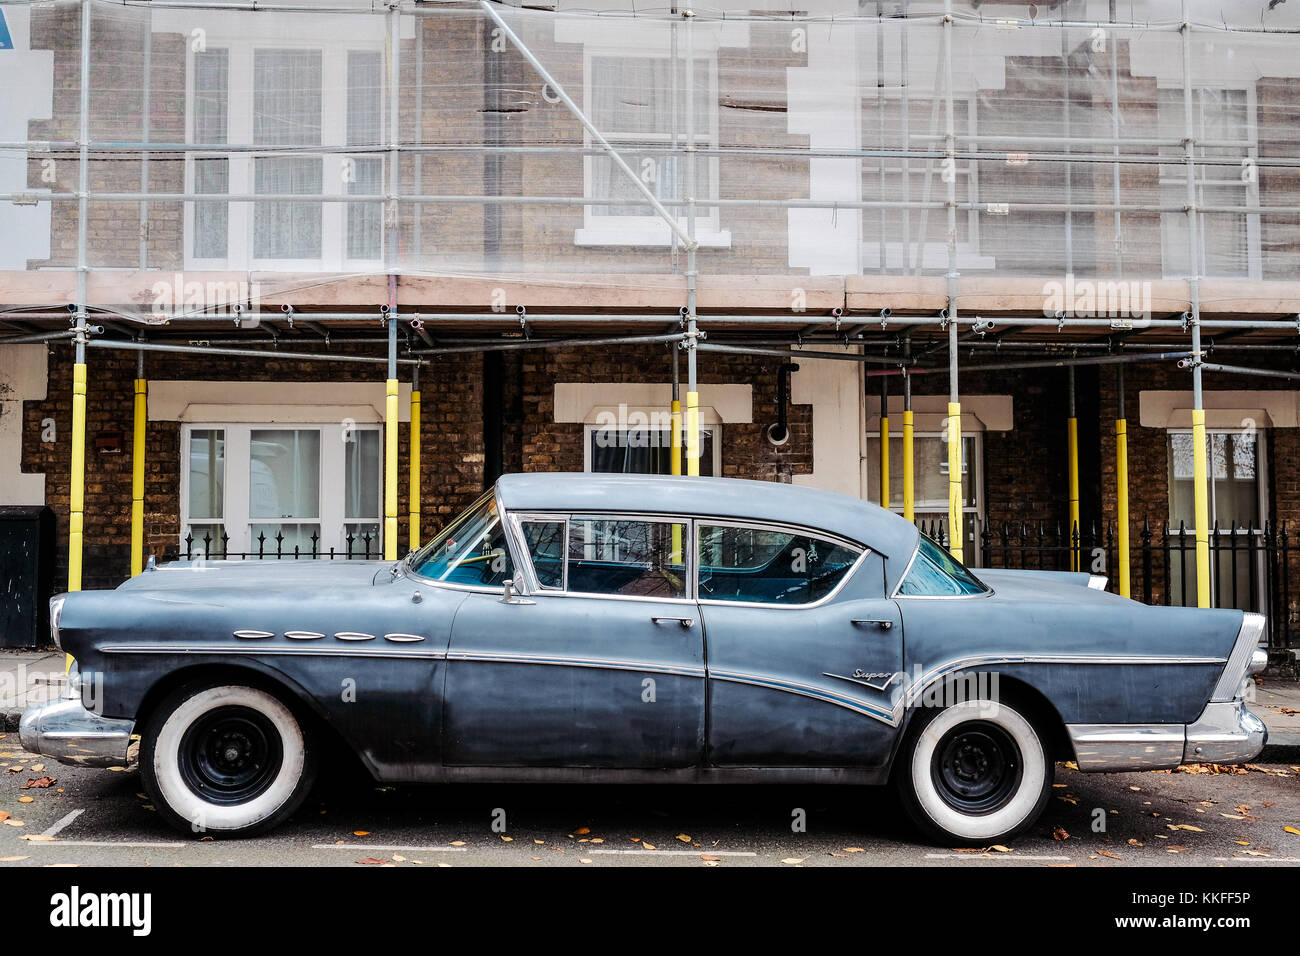 Classic American Car outside some properties in London undergoing regeneration Stock Photo